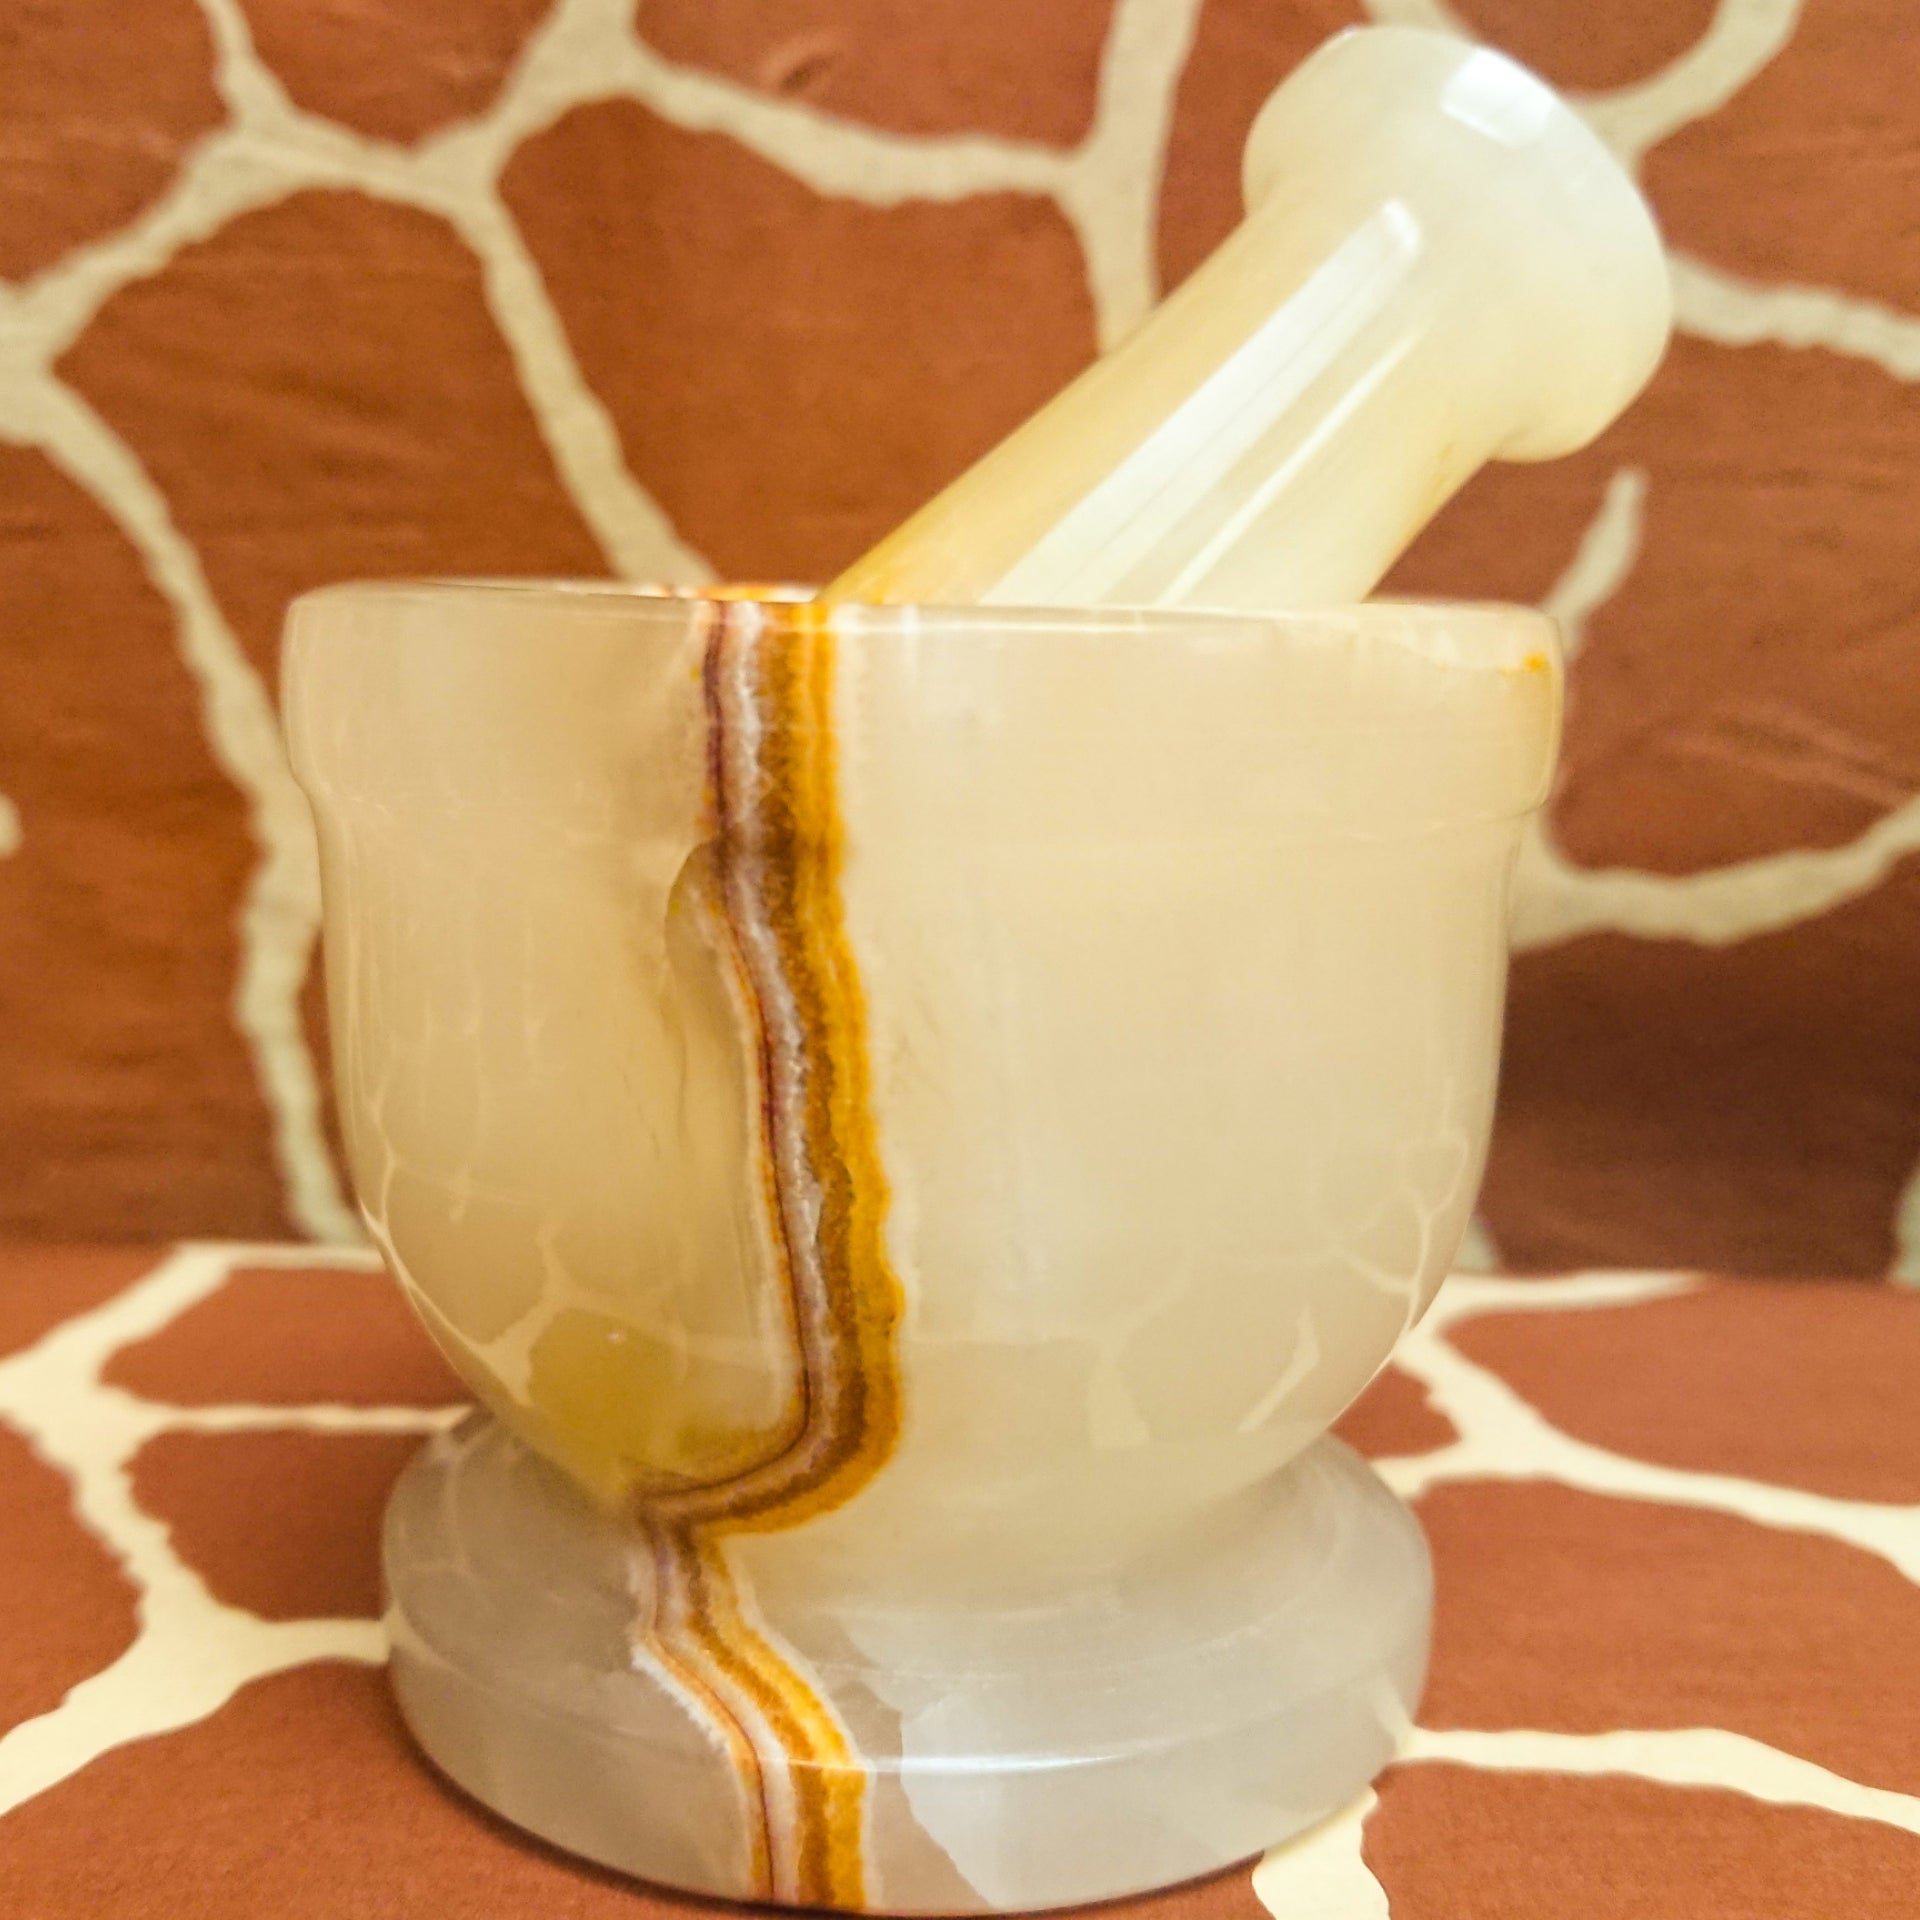 Pakistanding in the Light: Banded Onyx Mortar & Pestle from Pakistan